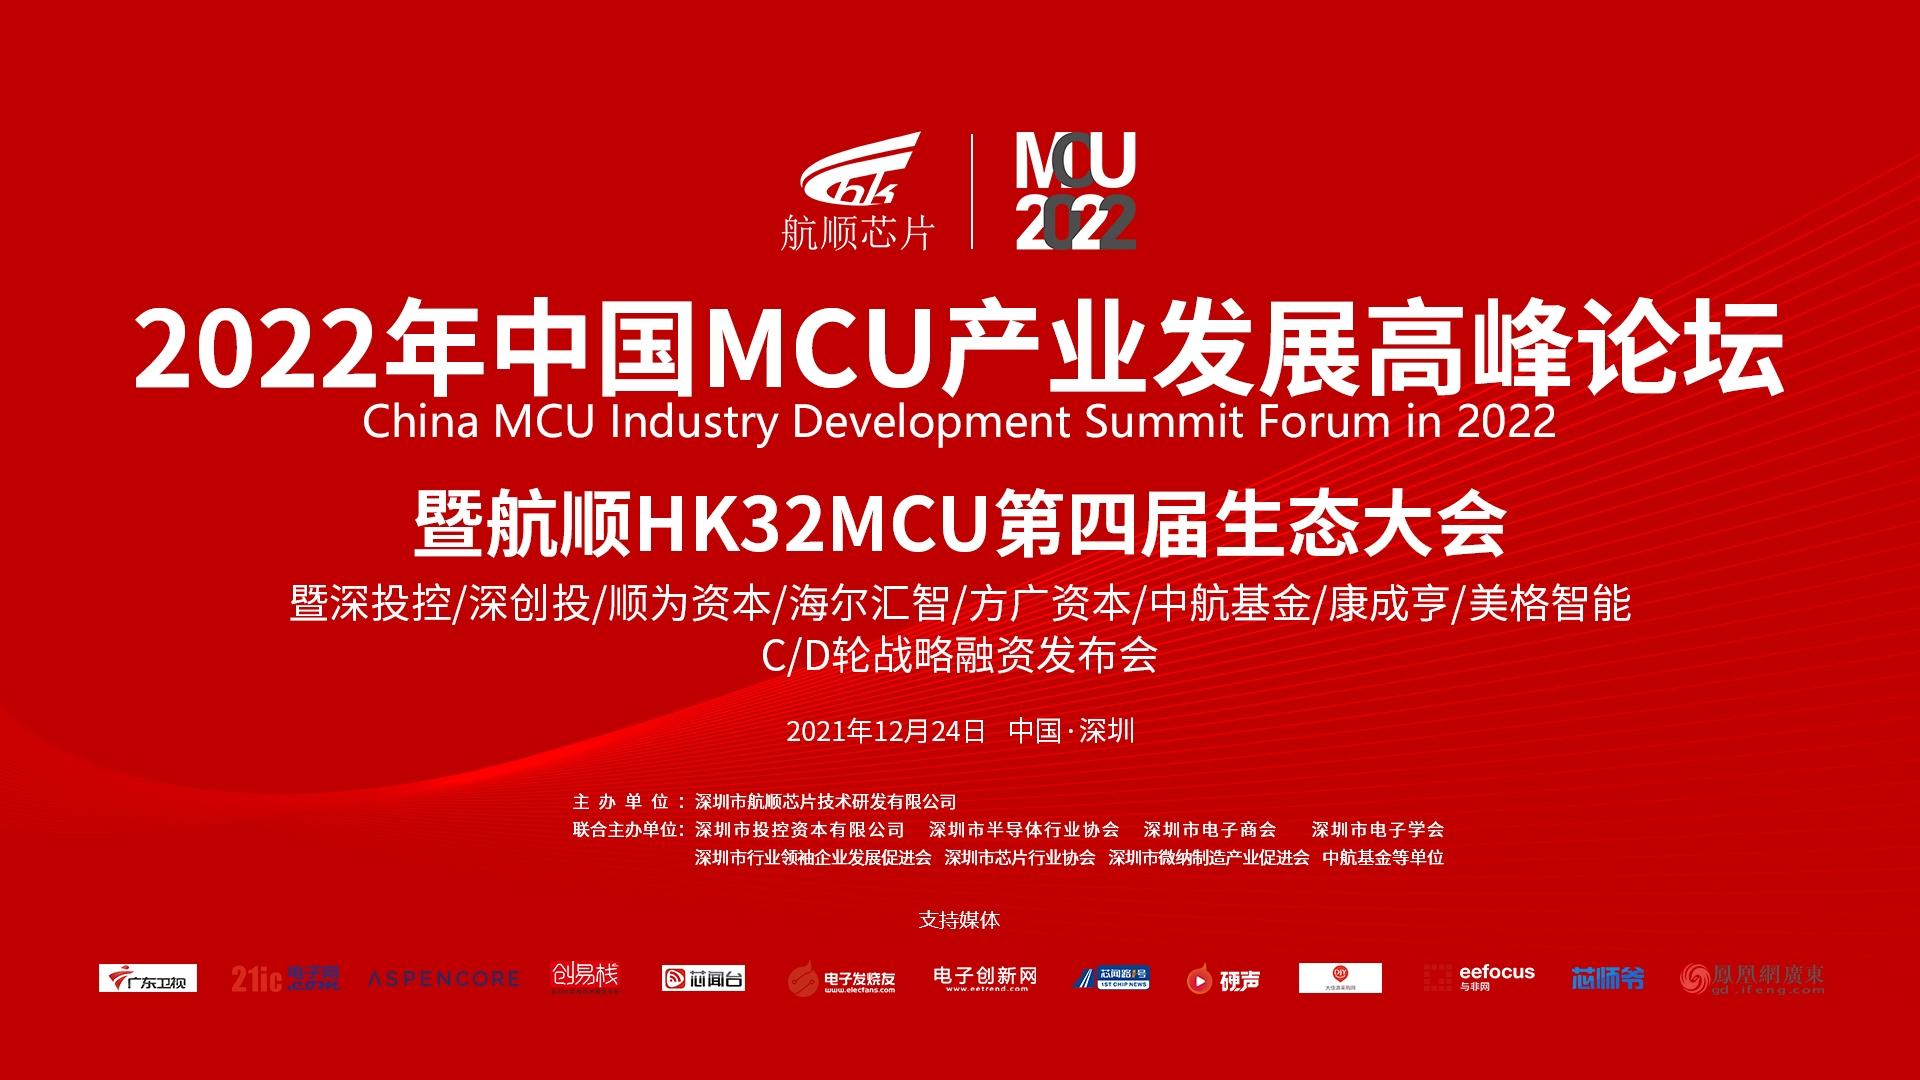 The 2022 China MCU Industry Development Summit Forum and the 4th Hangshun HK32MCU Ecological Conference were successfully held, and big names gathered to share the development of China